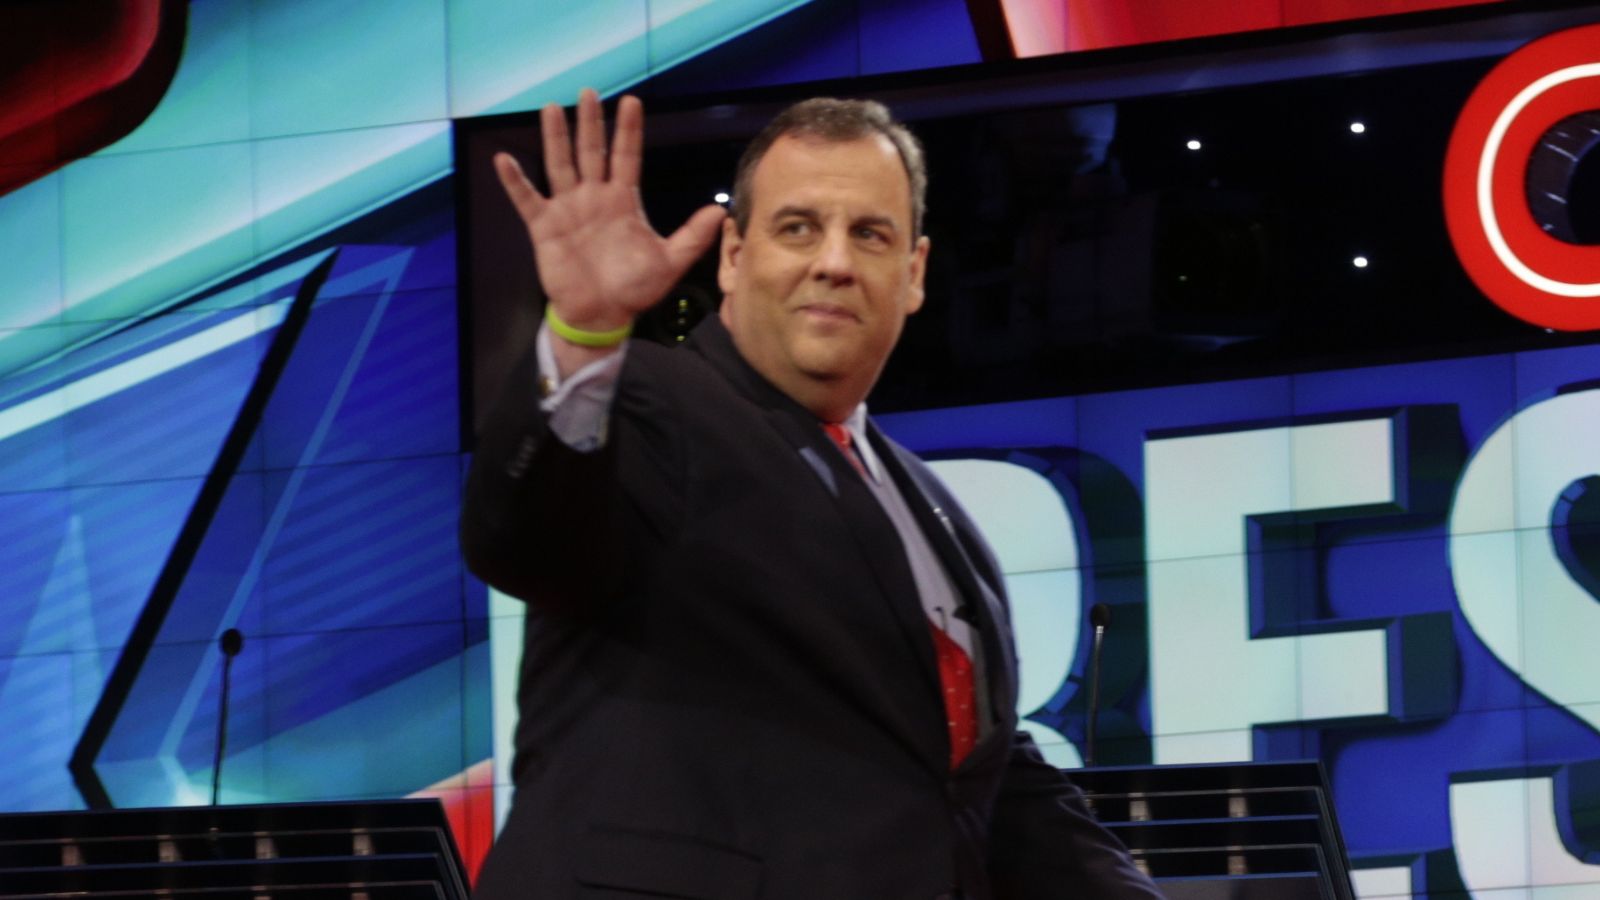 Chris Christie’s “Brash” Trump-Bashing Praised Despite Calls for Him to “Drop Out of the Race”